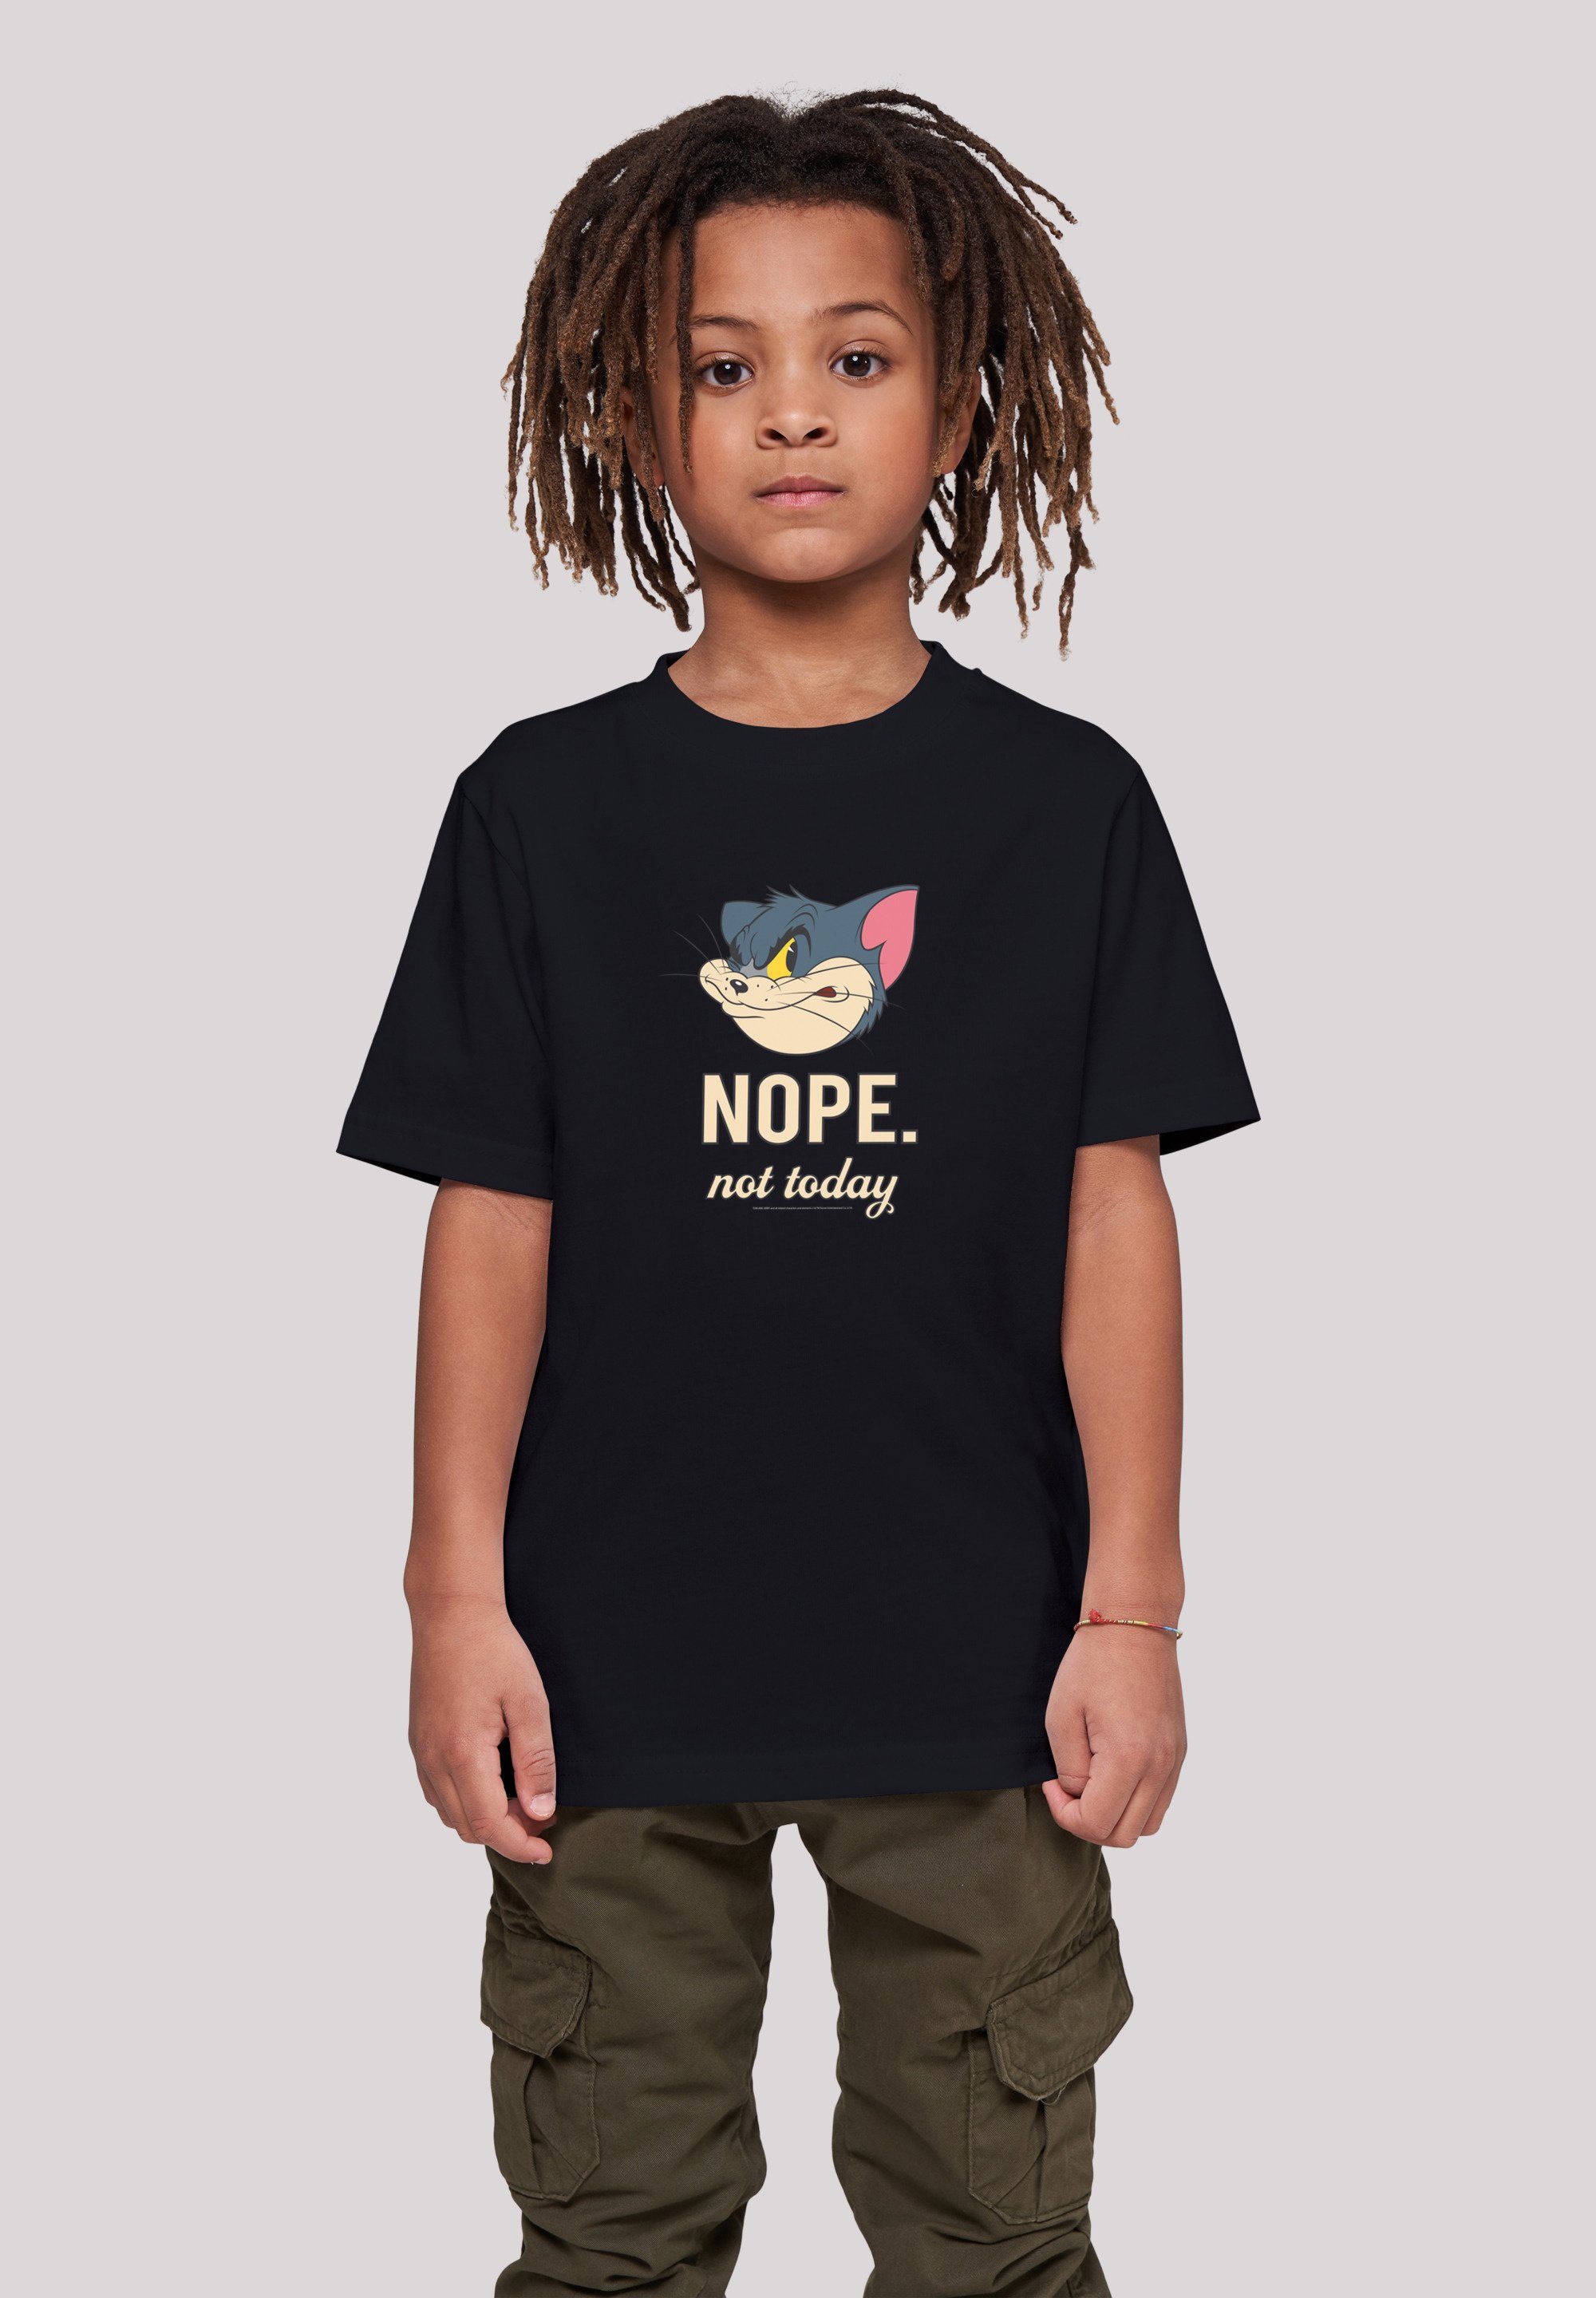 Serie Tom TV T-Shirt Today Nope and Jerry Not F4NT4STIC Print